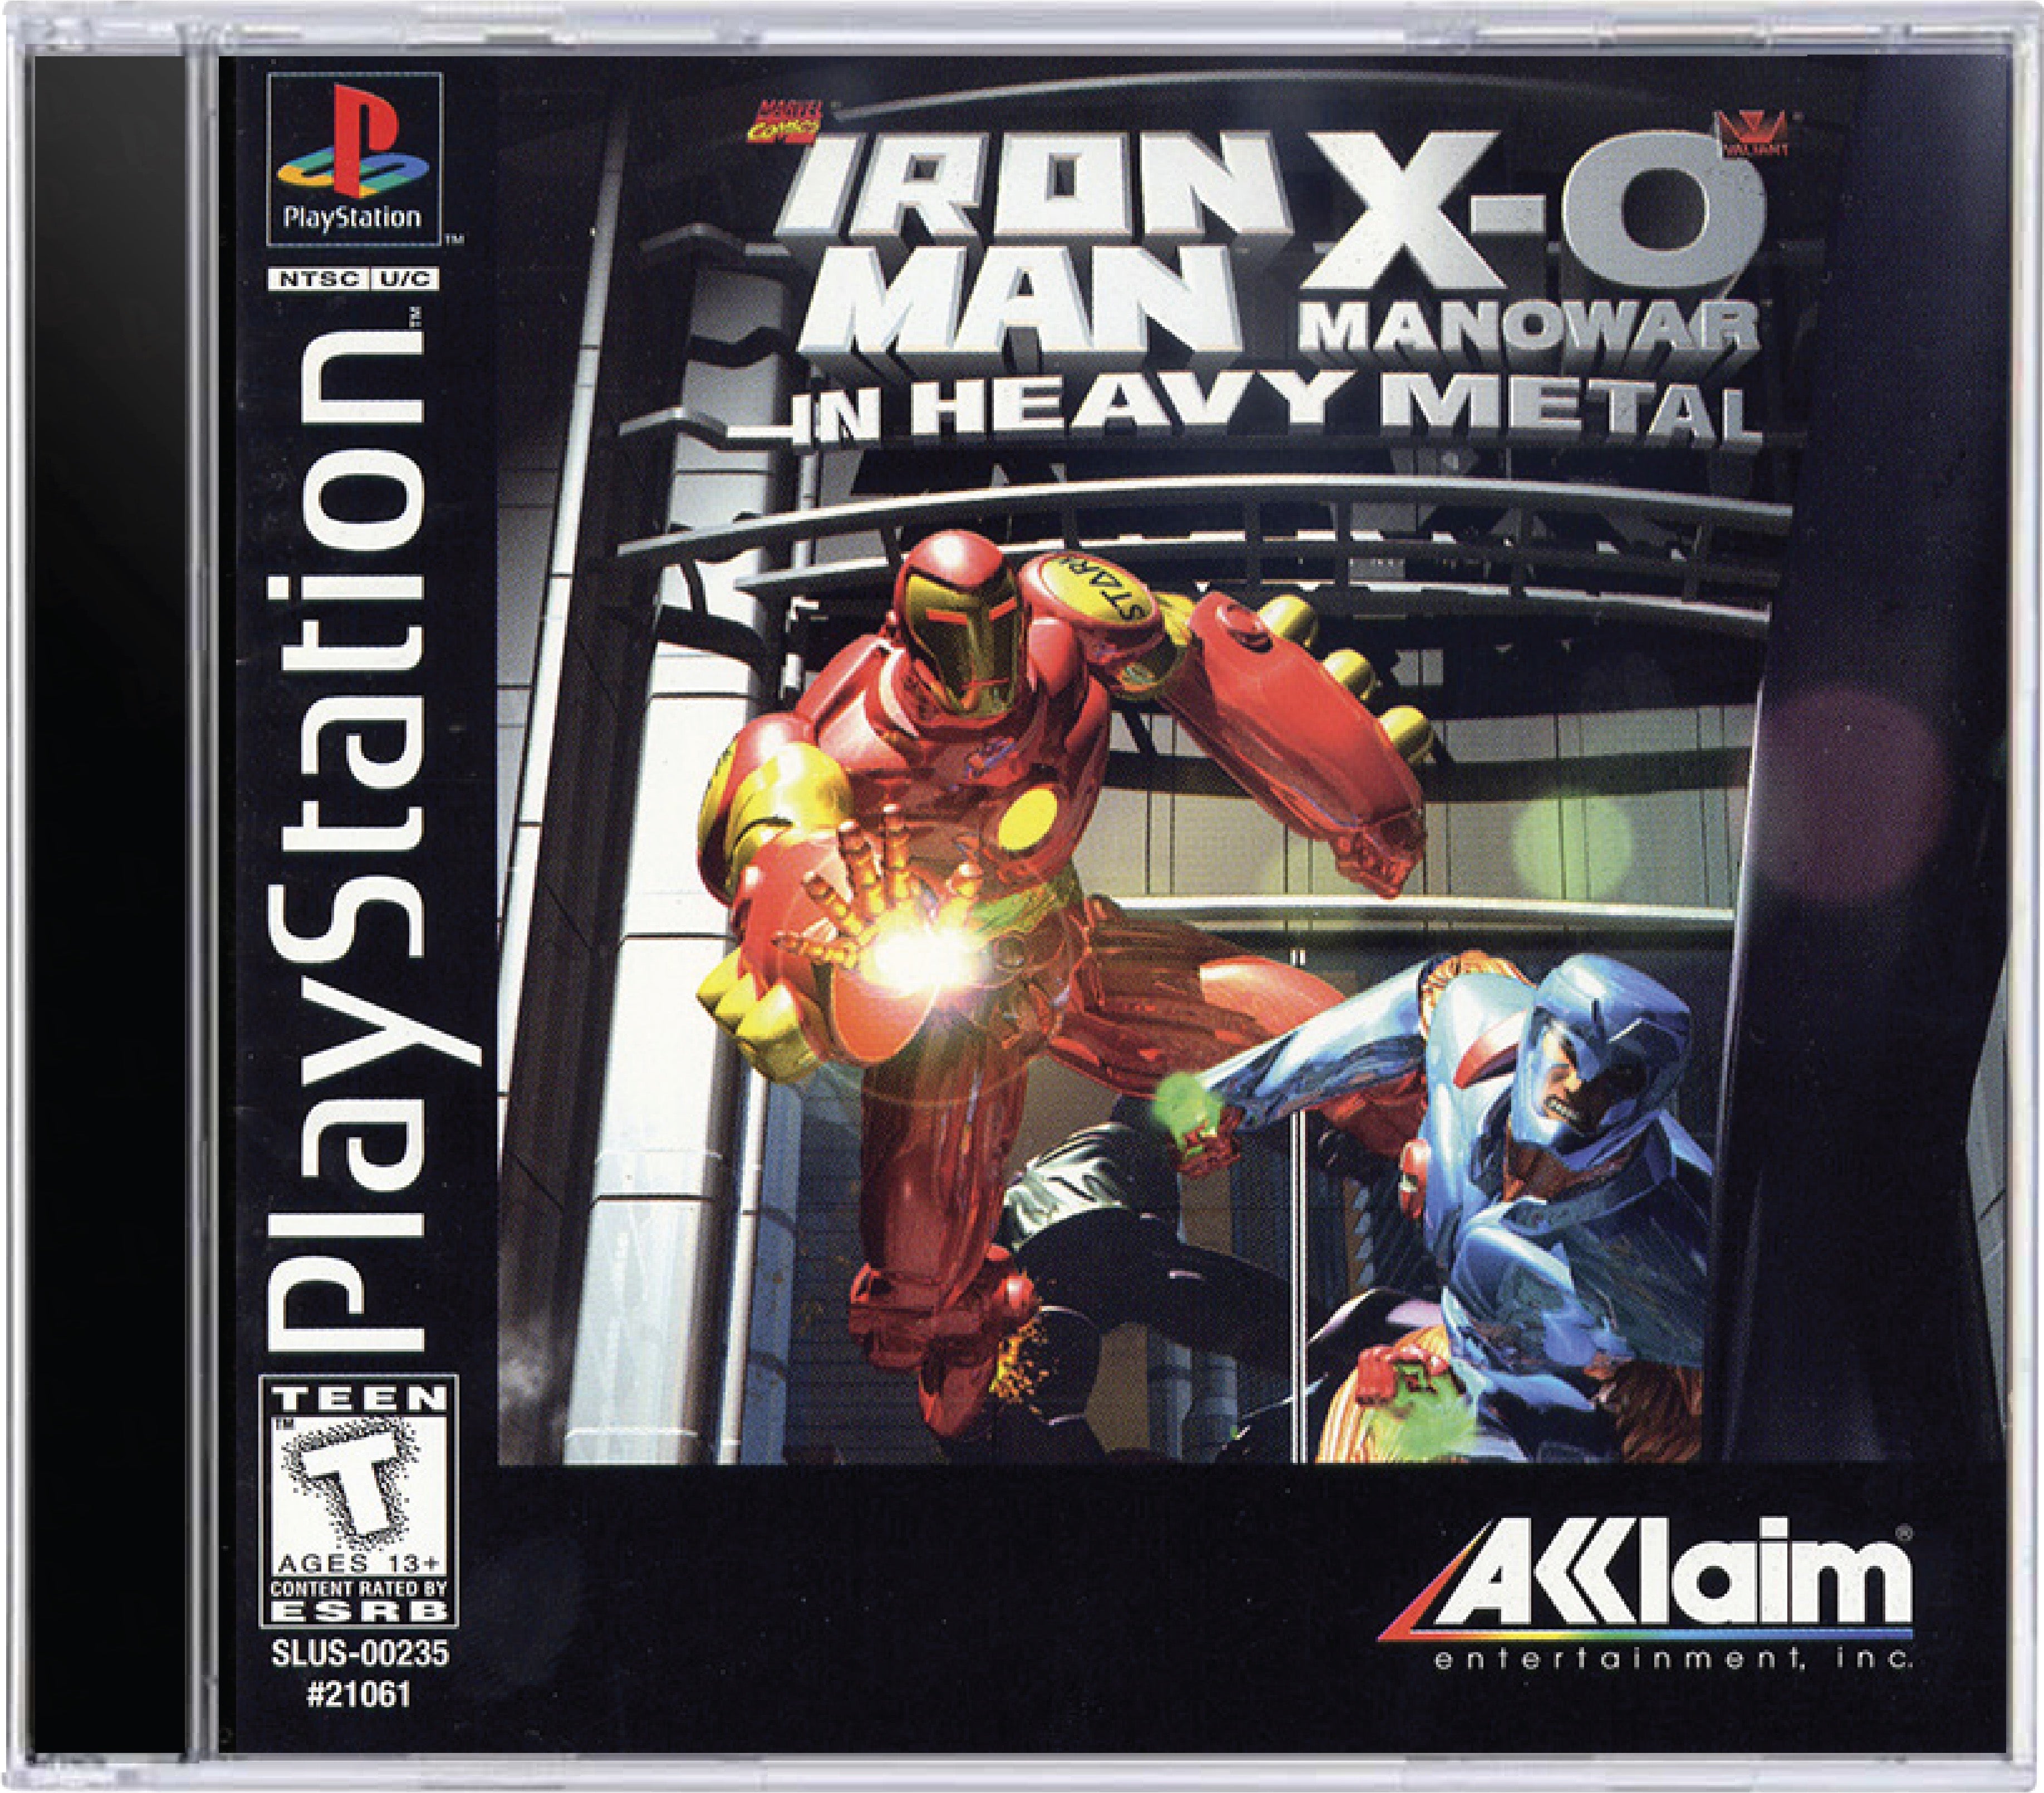 Iron Man X-O Manowar in Heavy Metal Cover Art and Product Photo